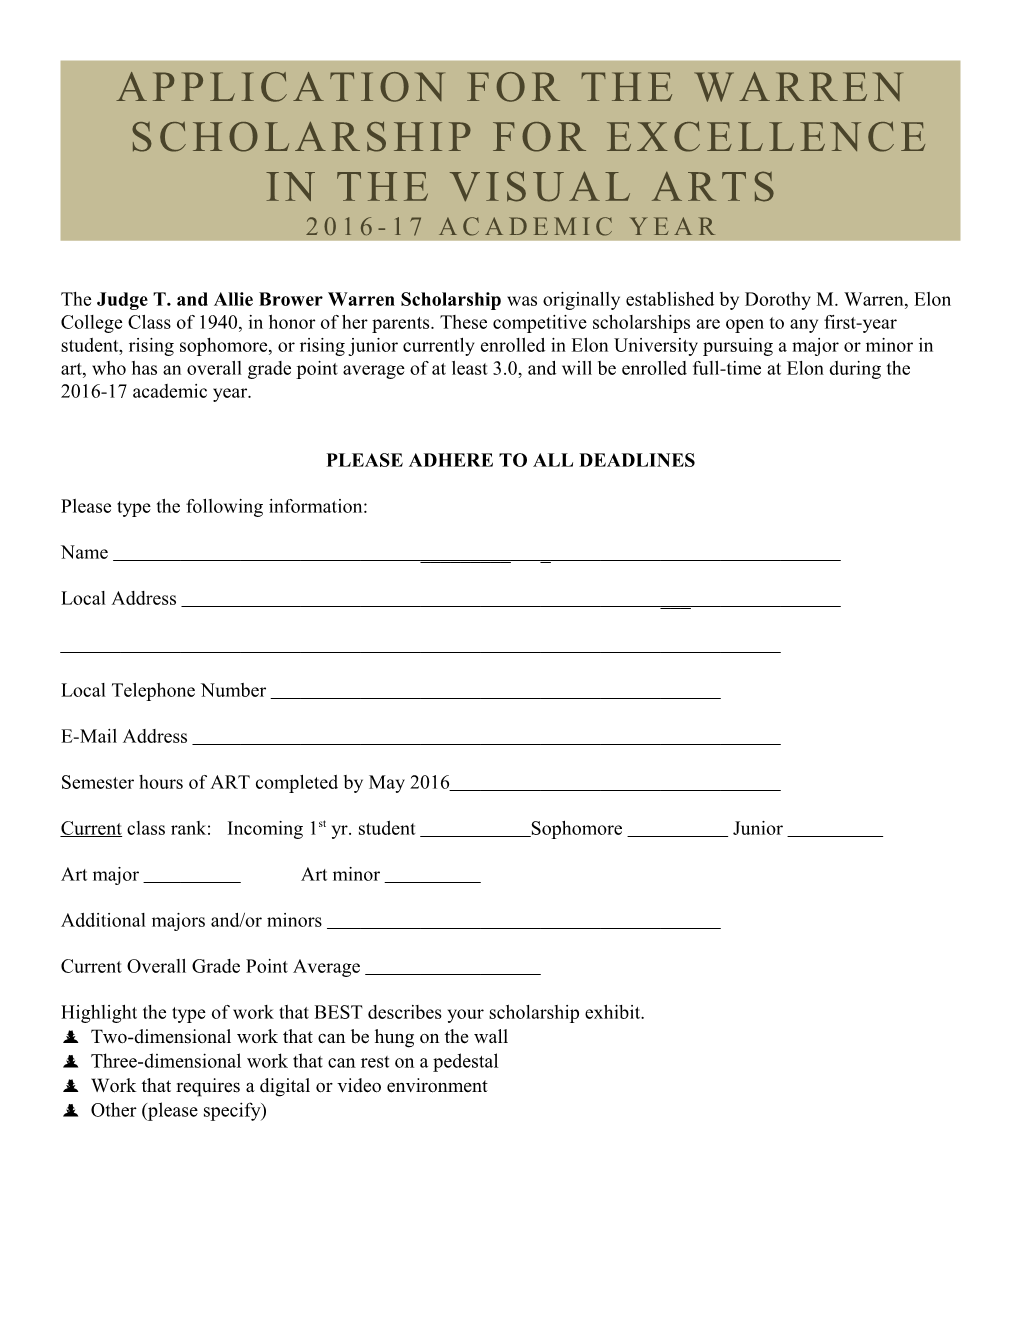 Application for the Warren Scholarship for Excellence in the Visual Arts